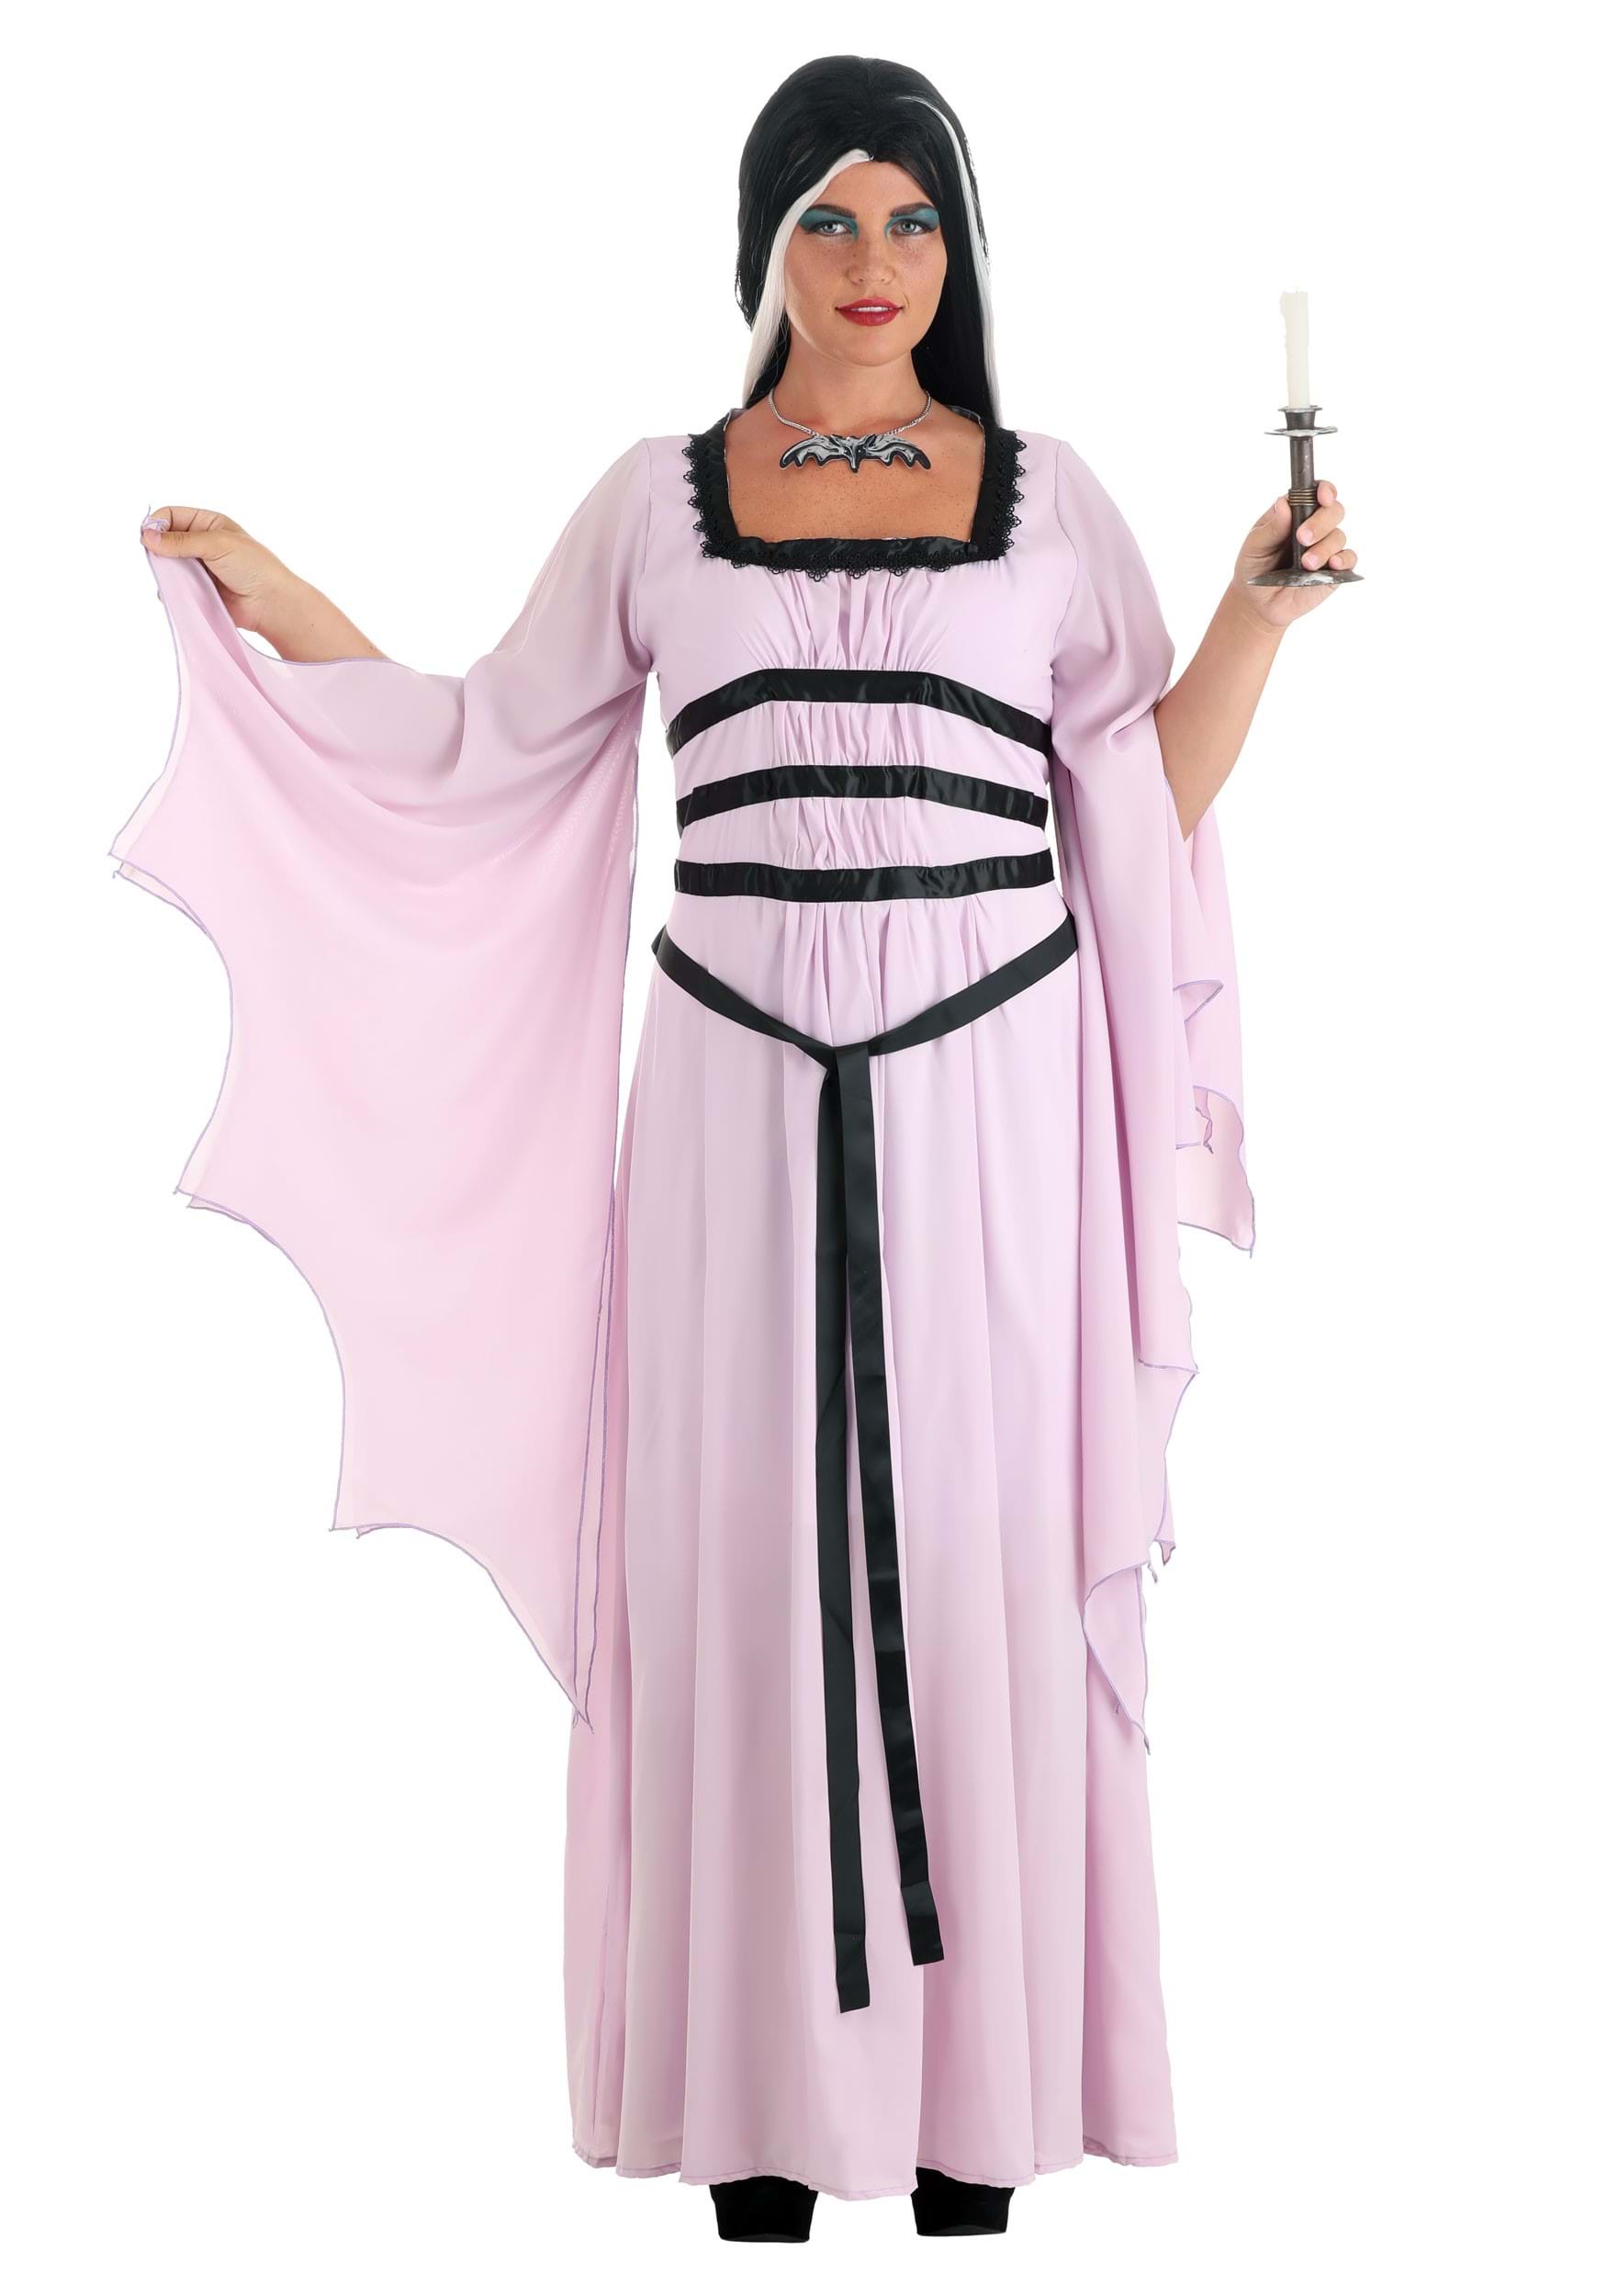 Women's The Munsters Lily Costume